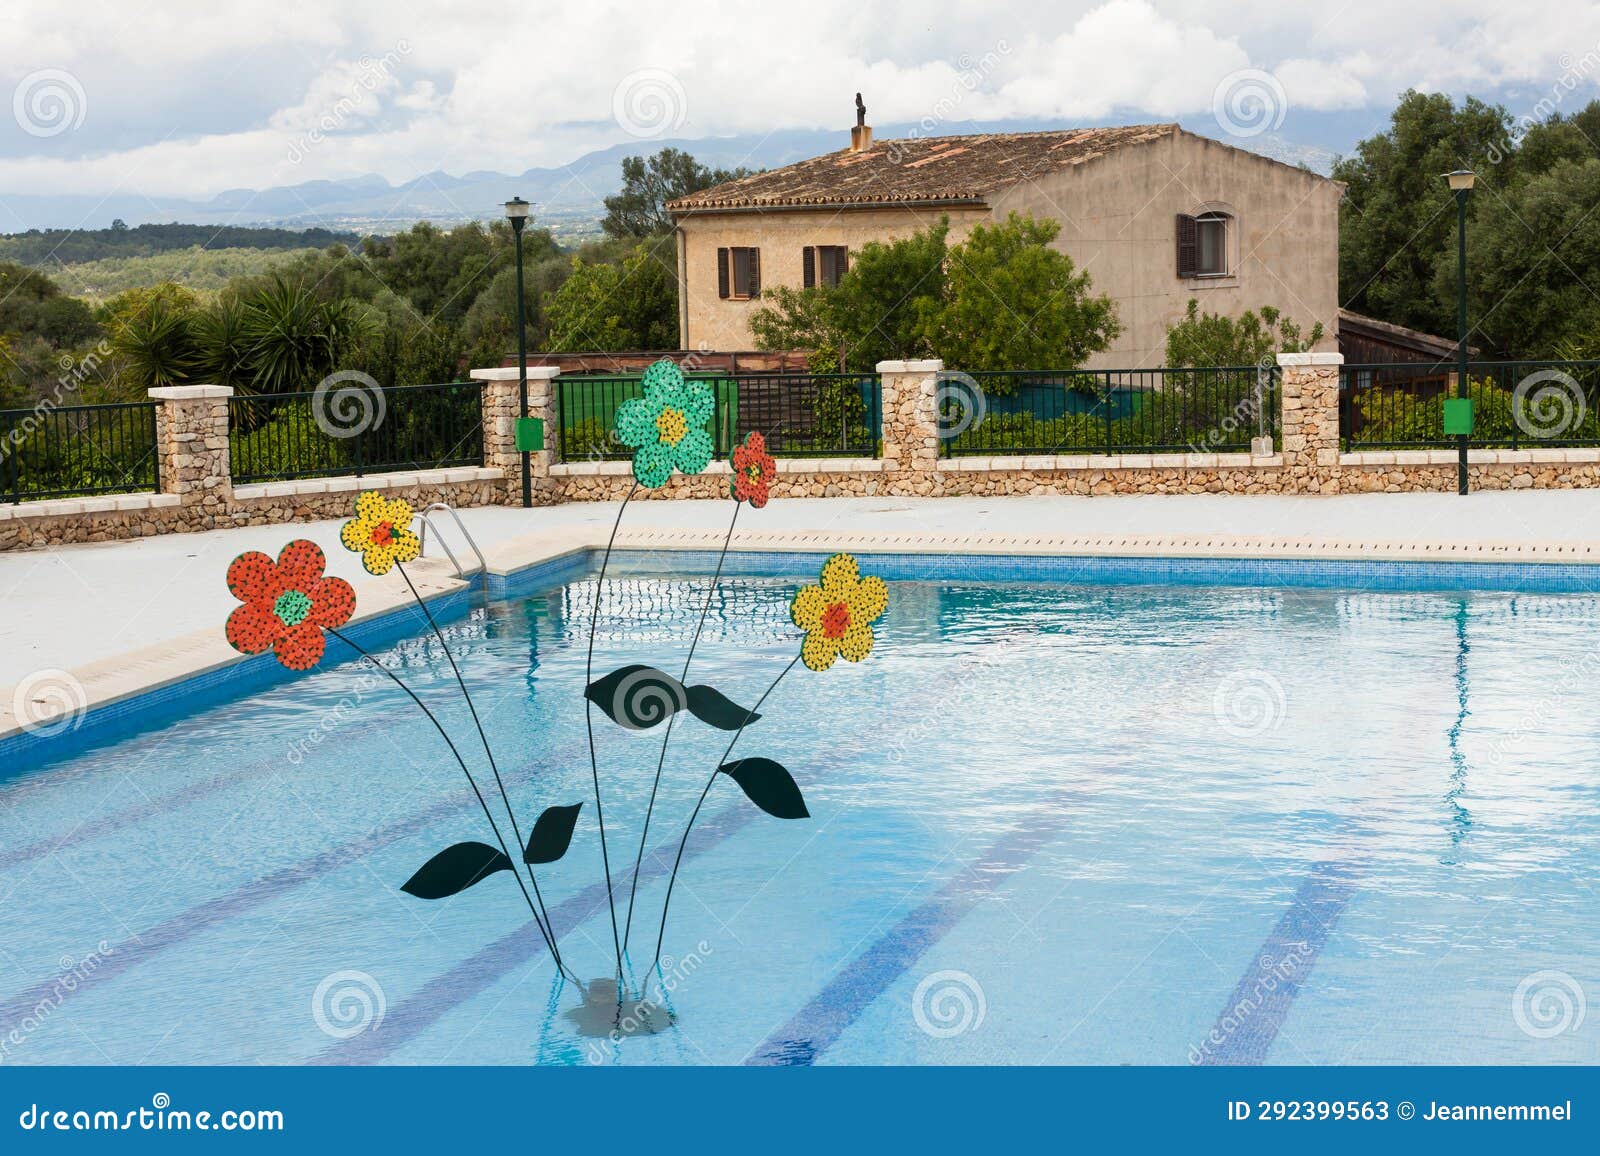 flower decoration in the swimming pool on 